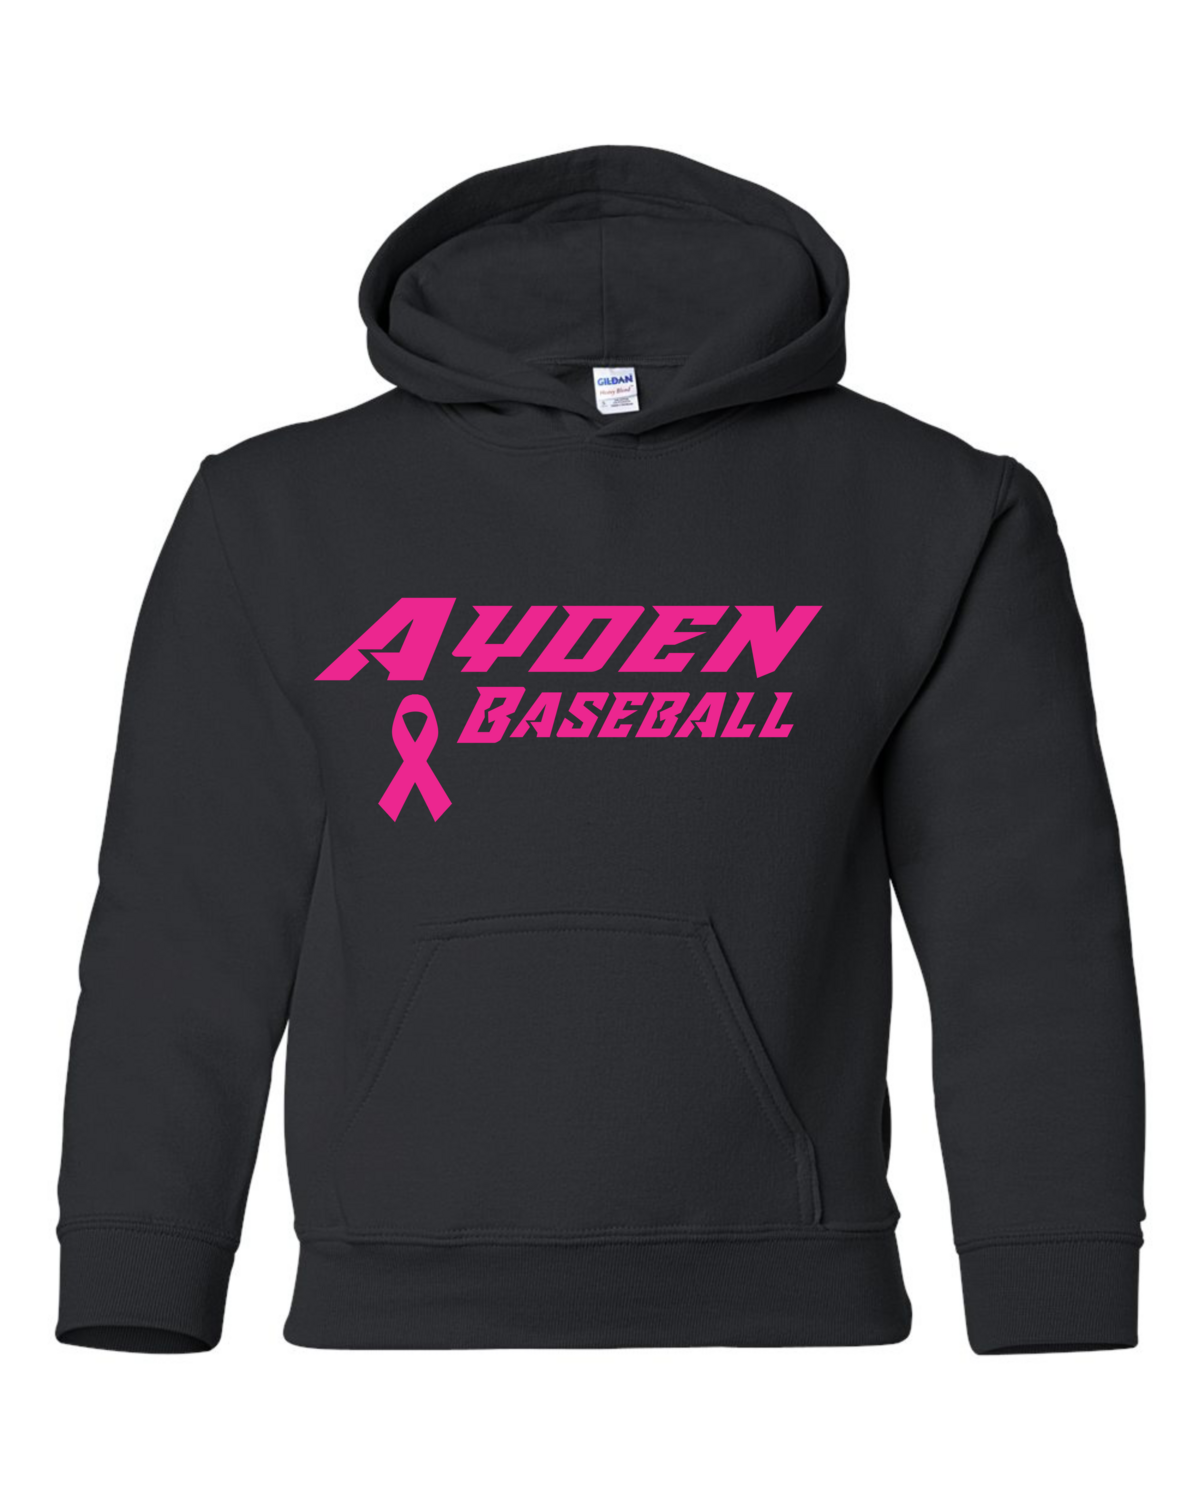 Breast Cancer Awareness Hoodie (Black)  - Adult & Youth